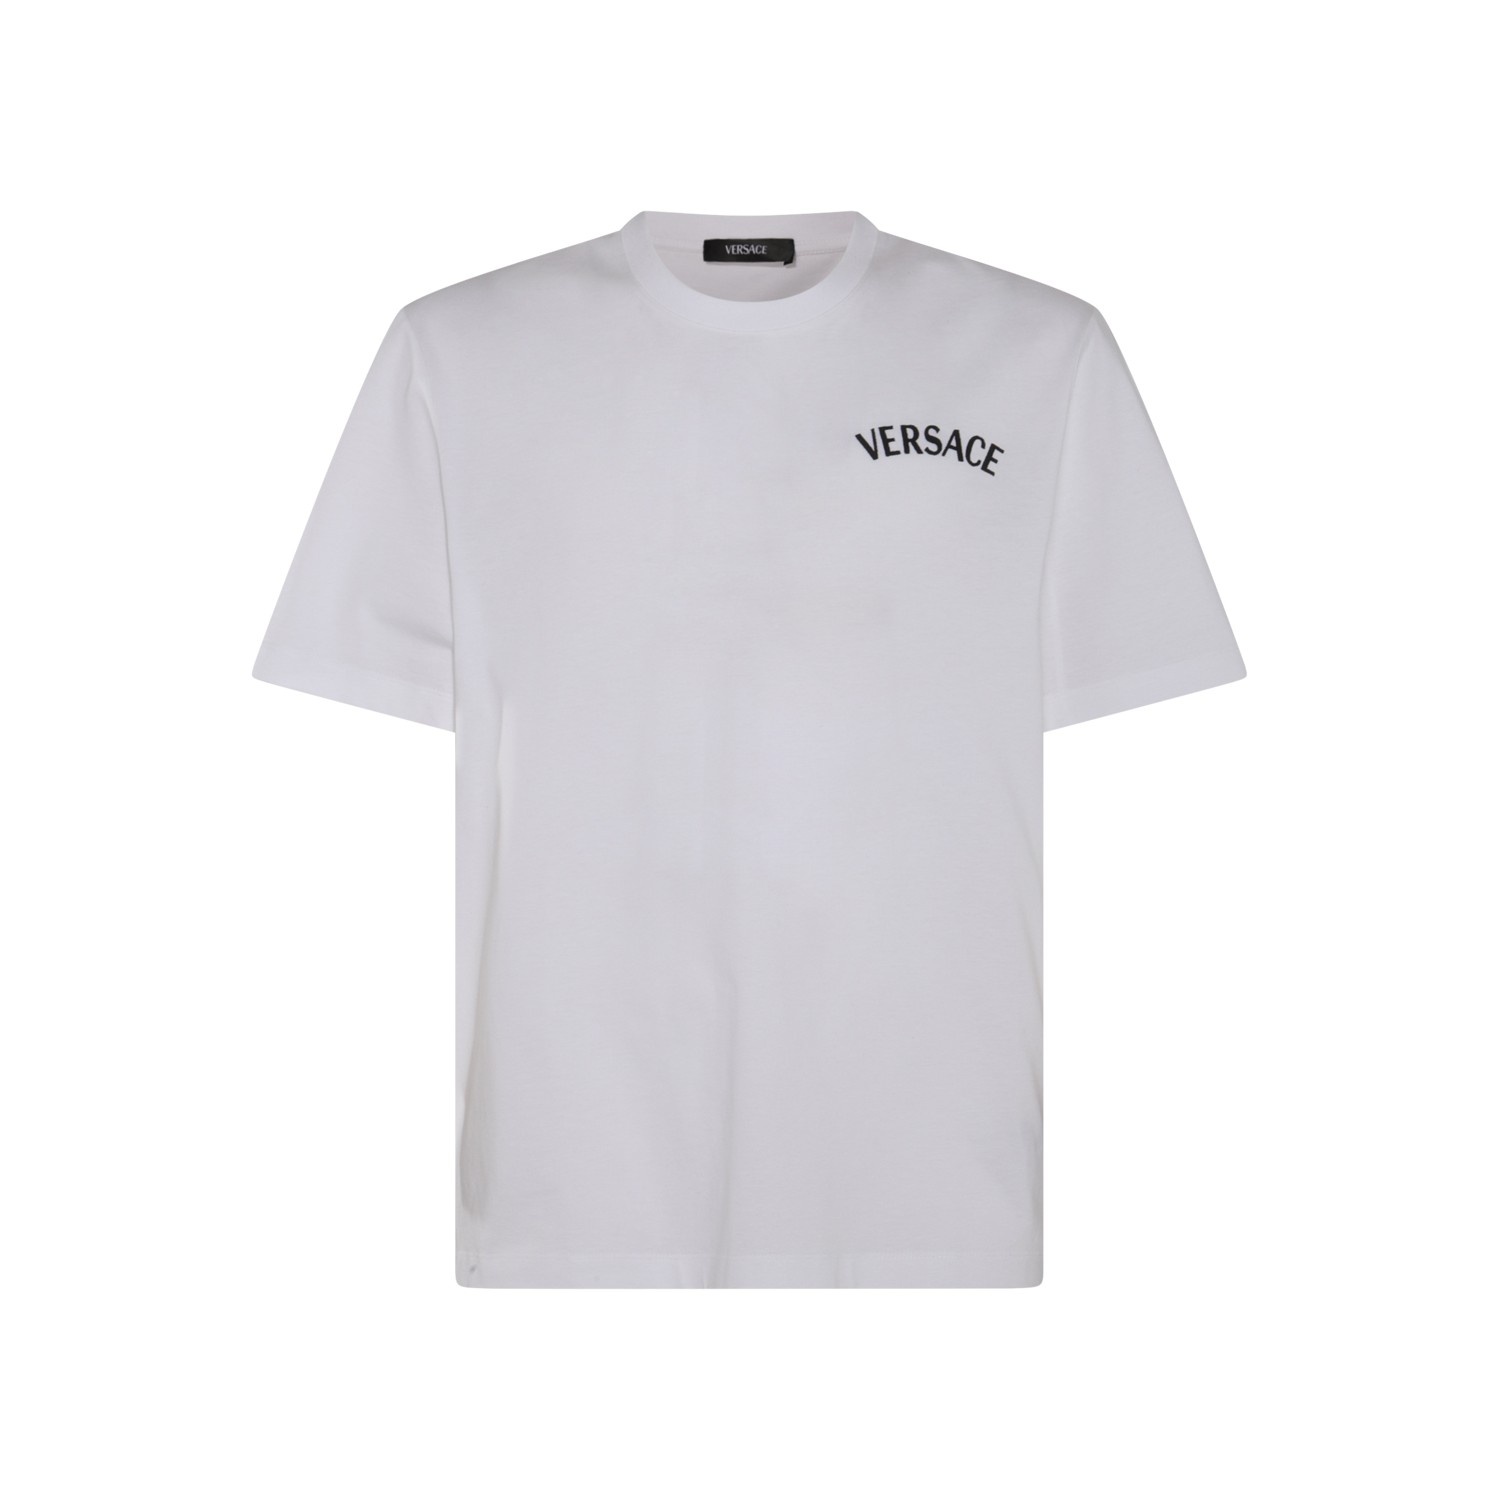 WHITE AND BLACK COTTON T-SHIRT - 1